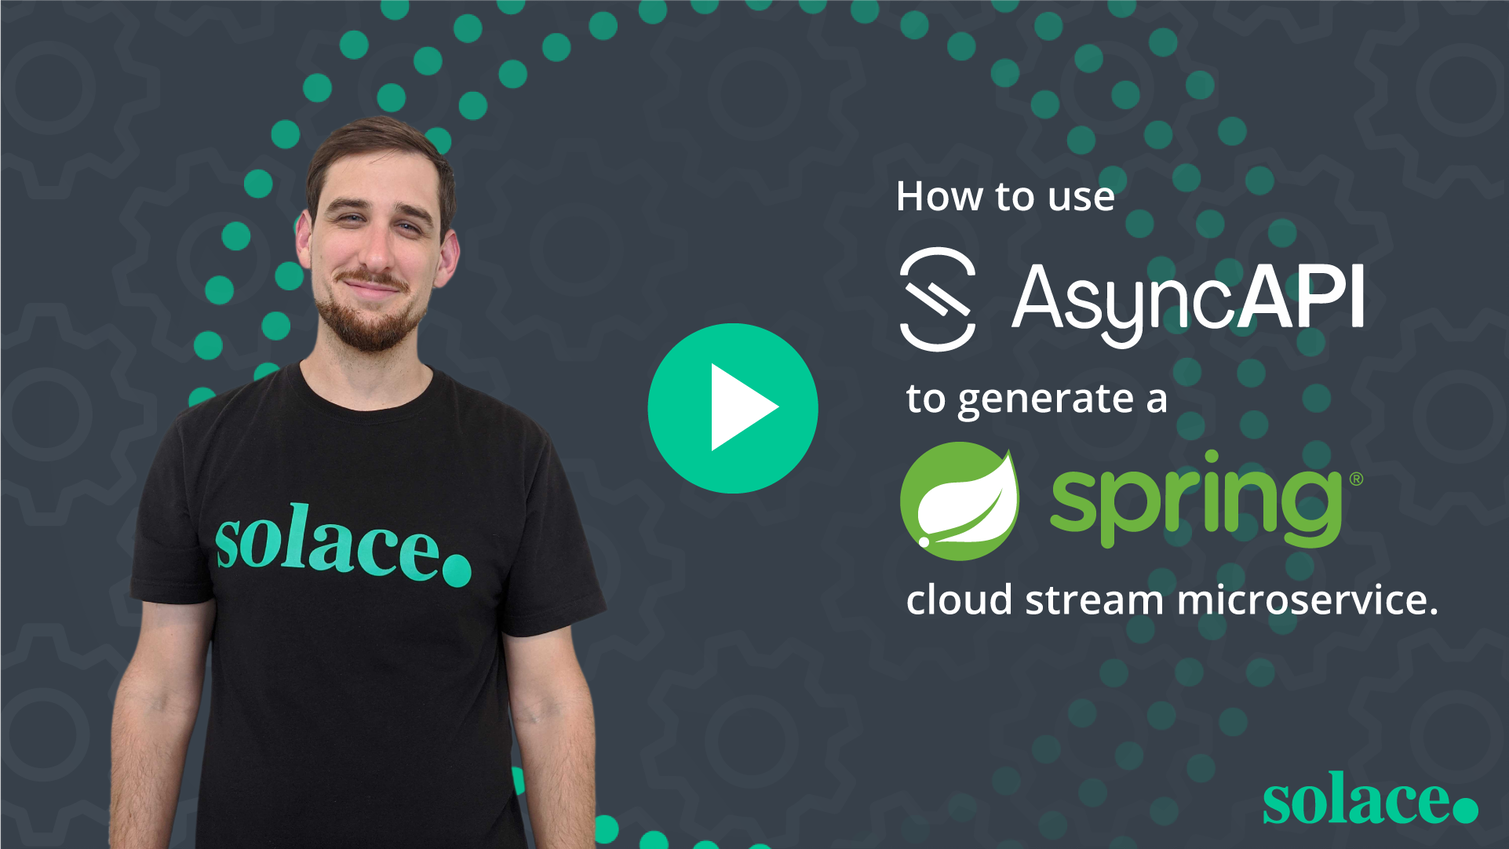 How to use AsyncAPI to generate a spring cloud stream microservice